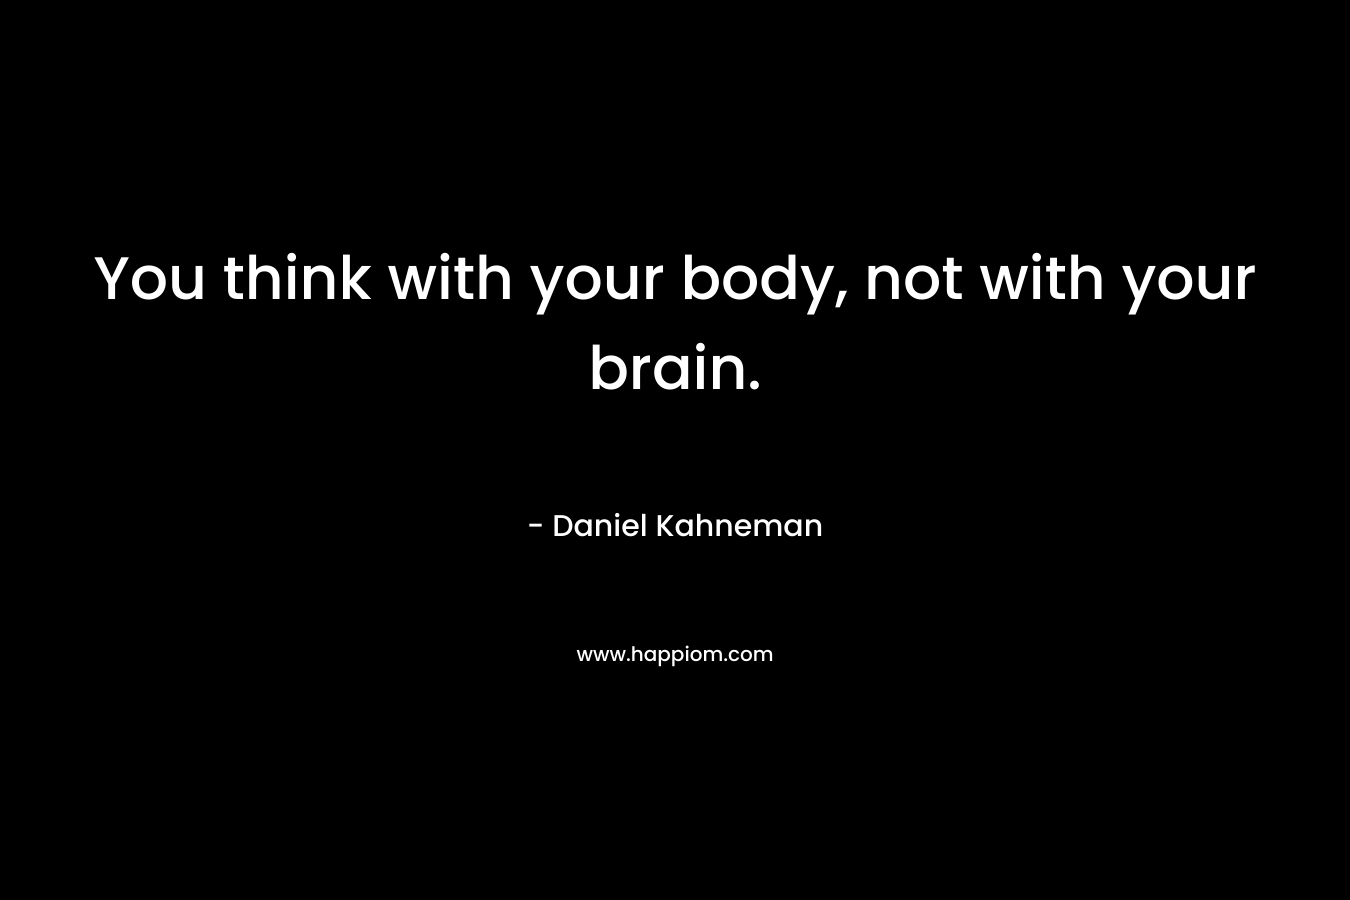 You think with your body, not with your brain.